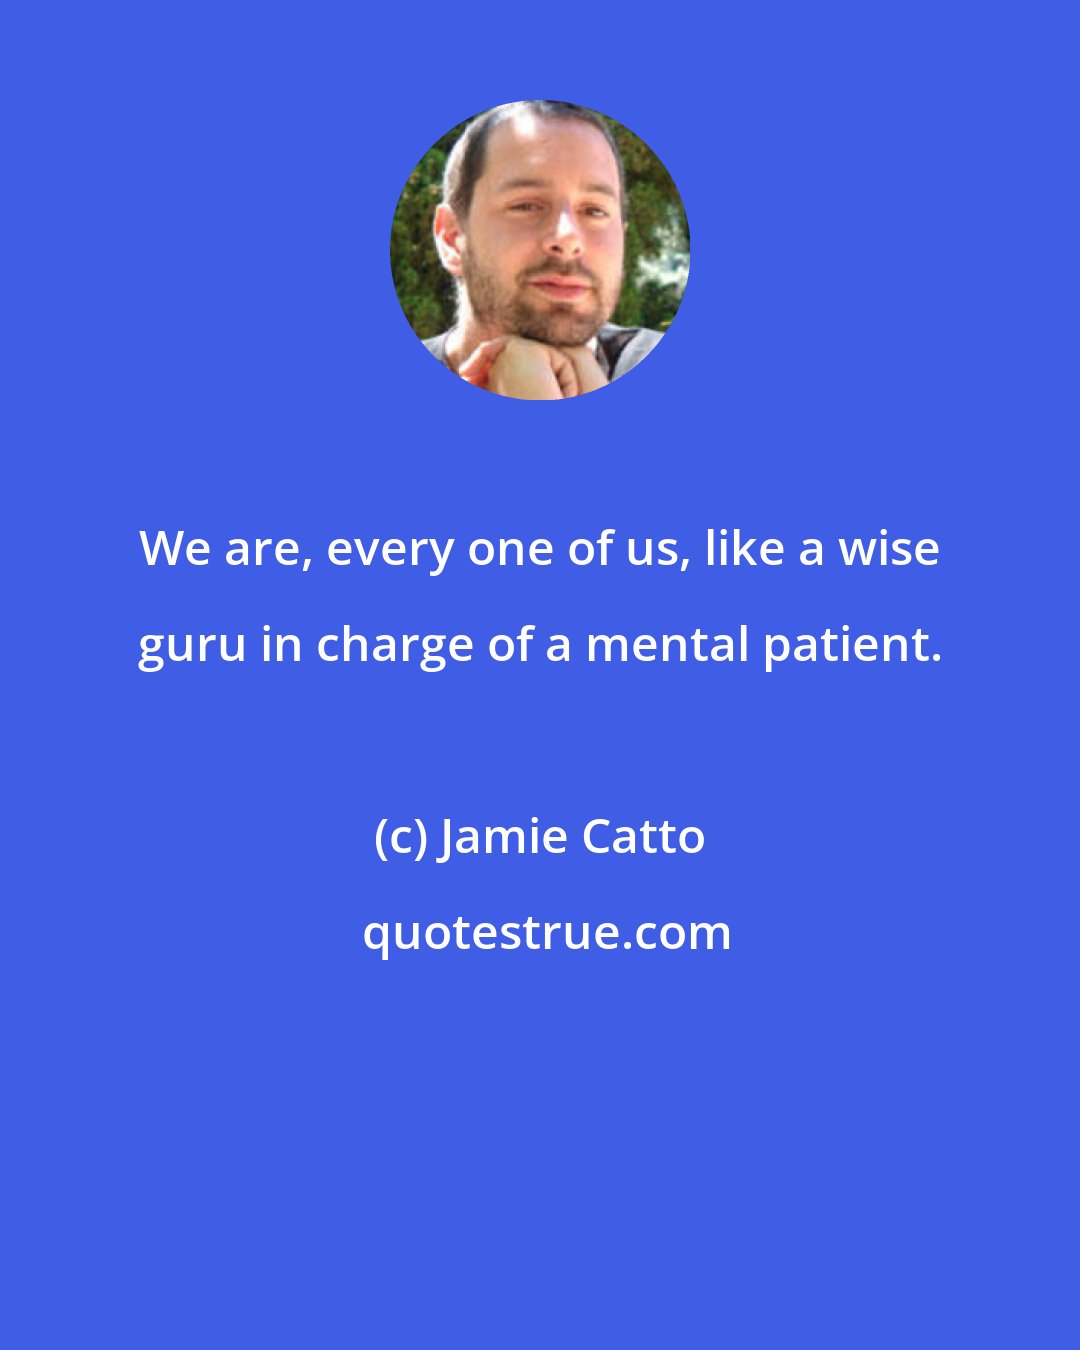 Jamie Catto: We are, every one of us, like a wise guru in charge of a mental patient.